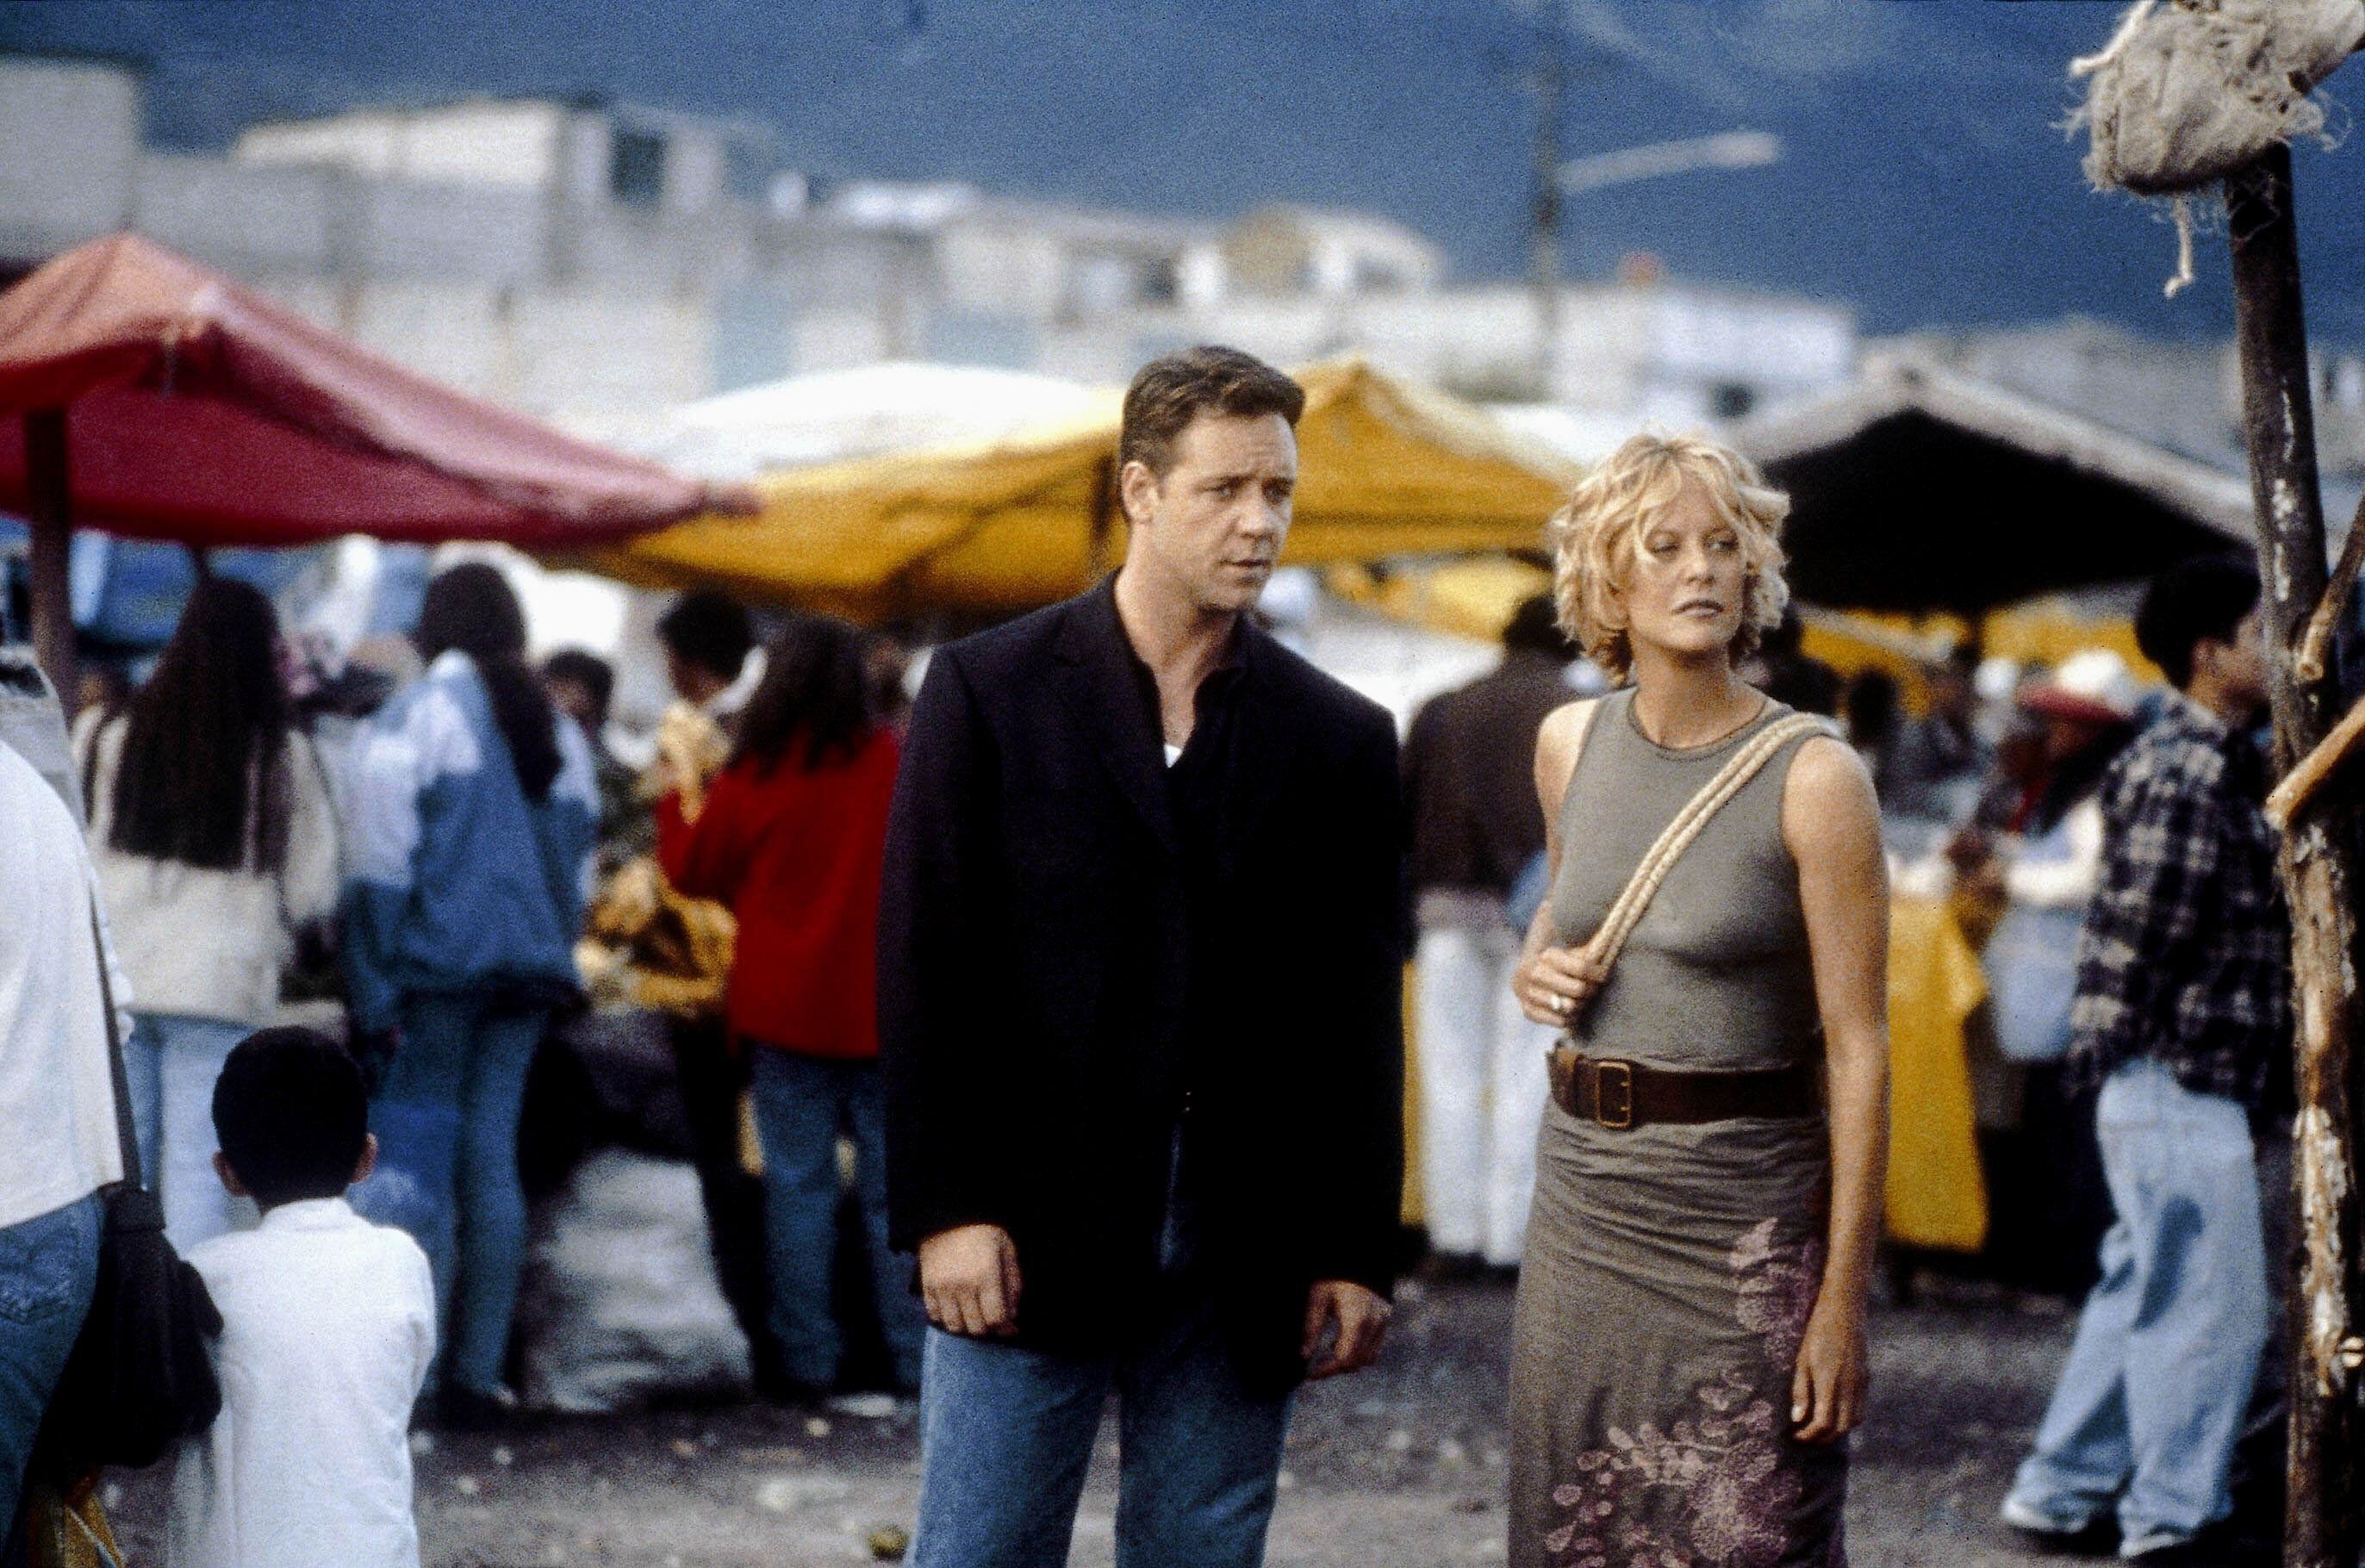 Russell Crowe and Meg Ryan stand out in a crowd